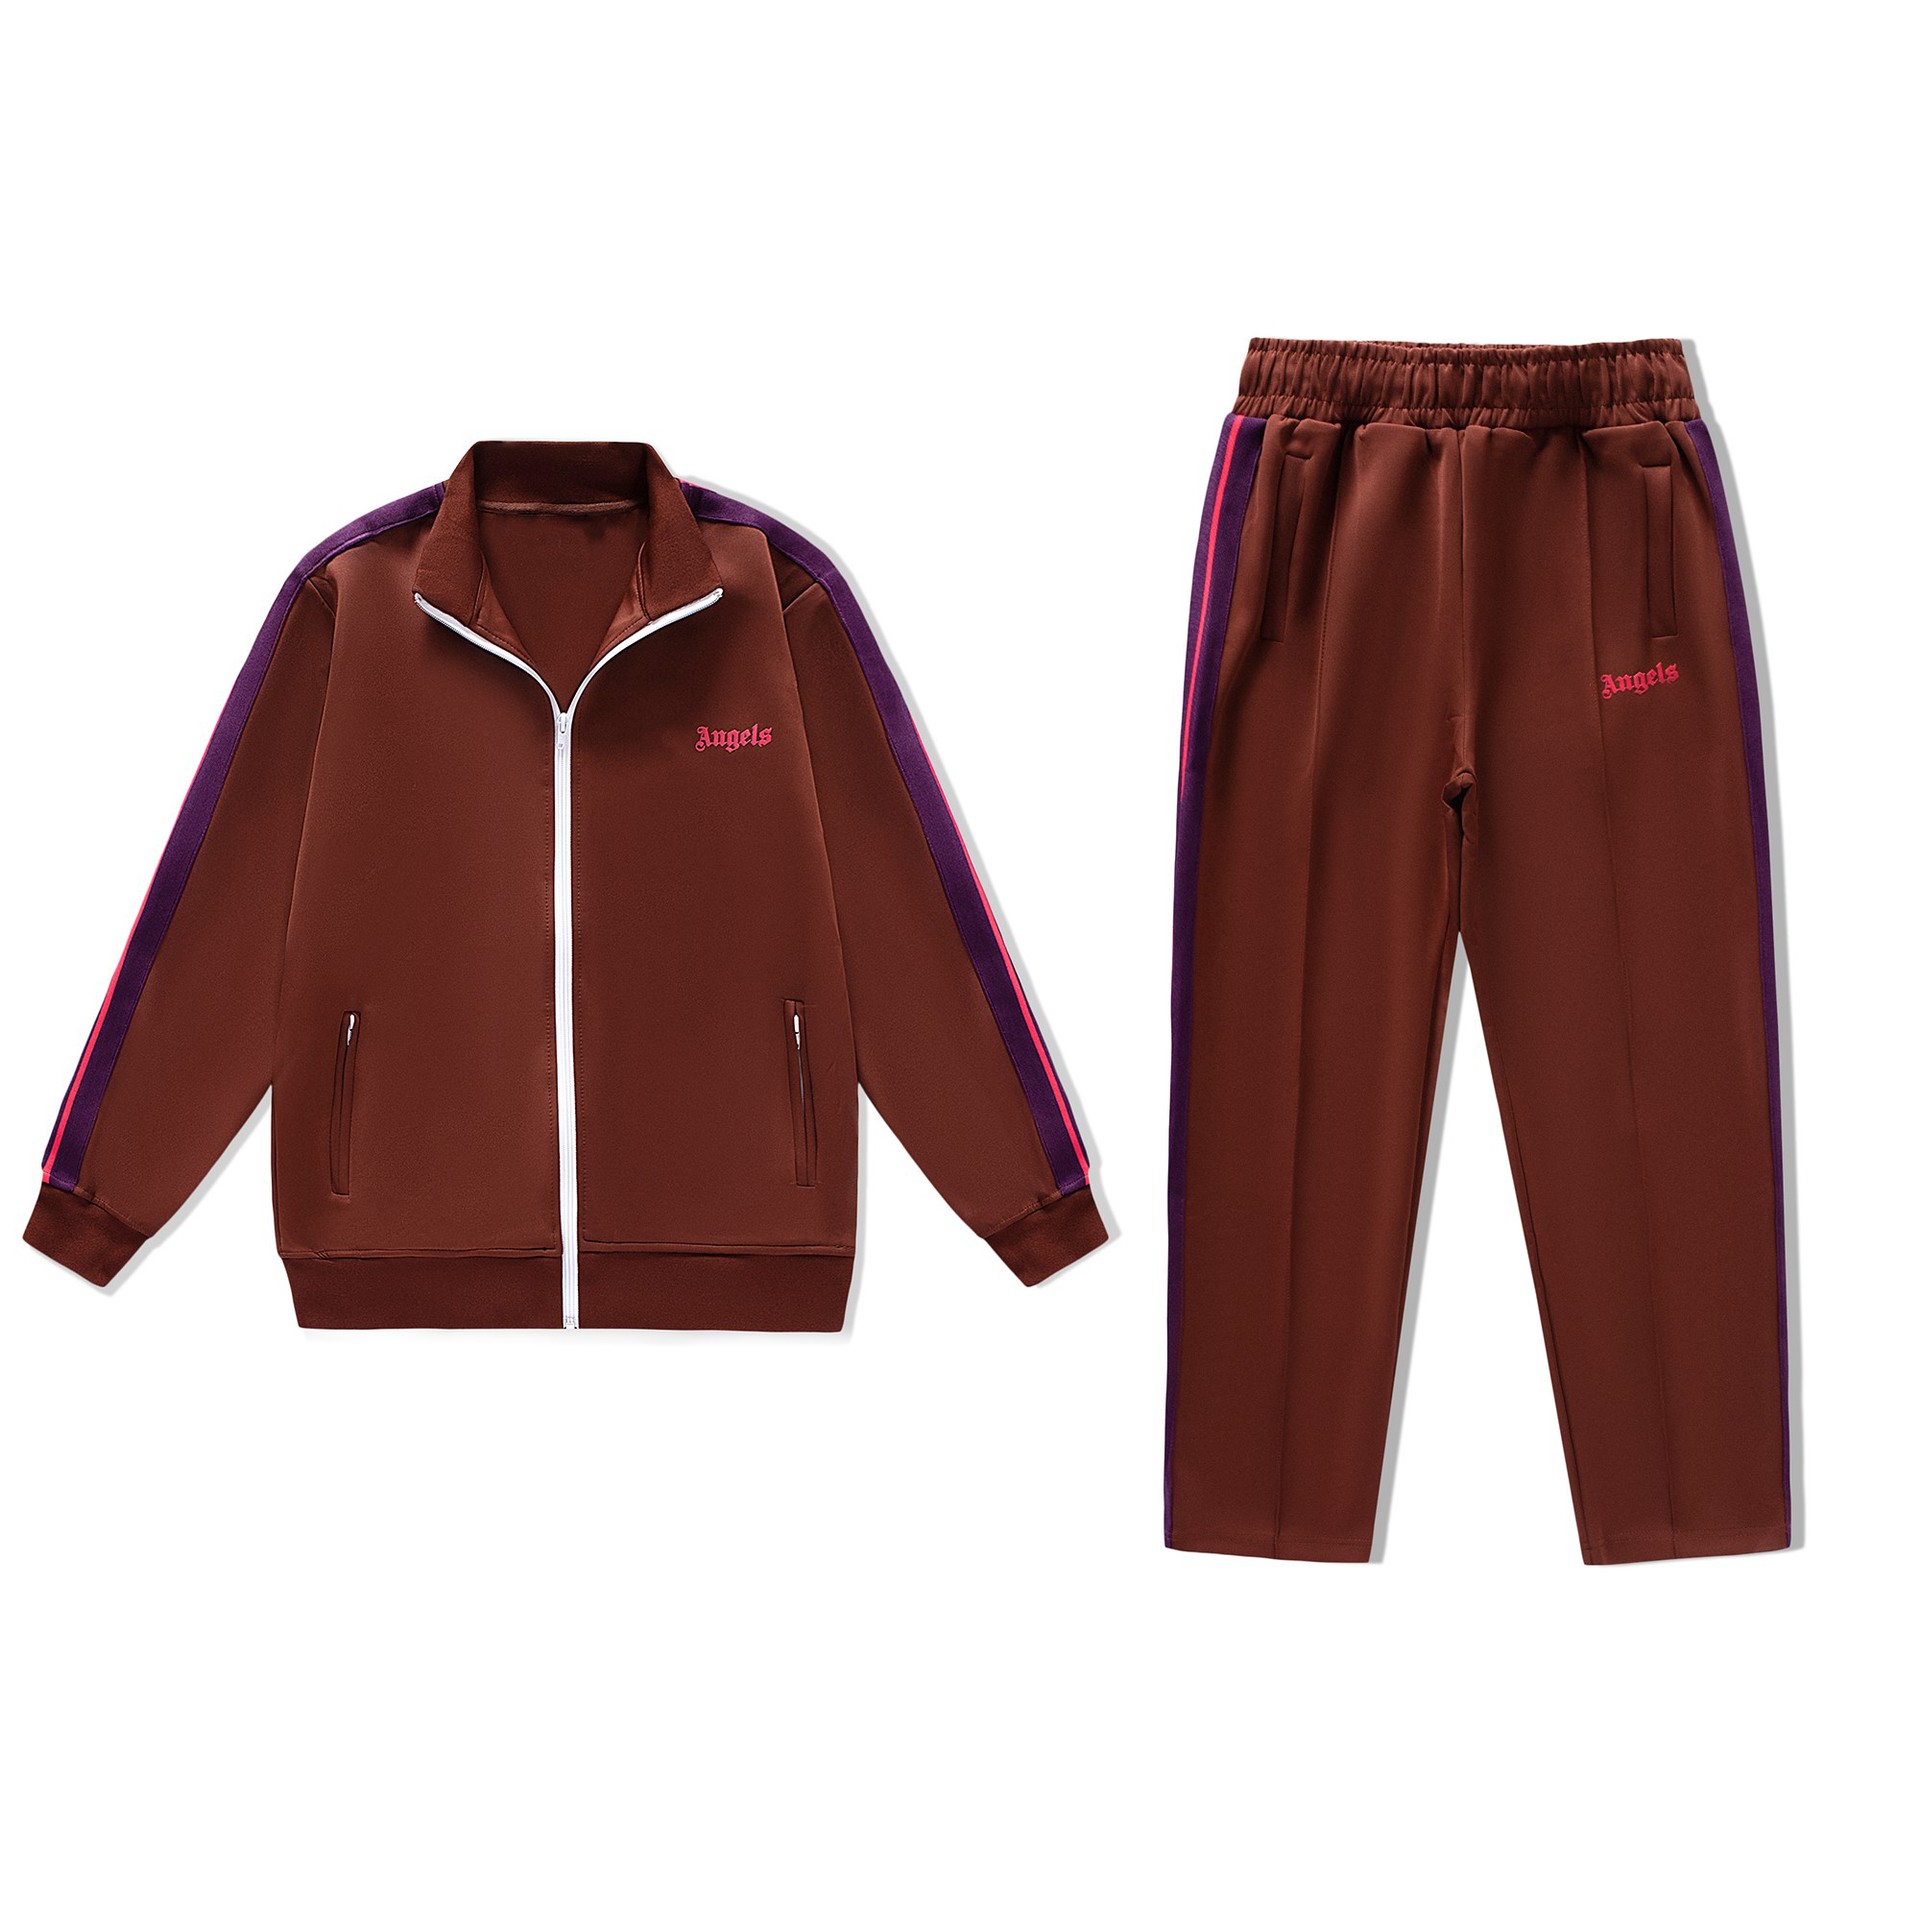 New angel sports casual jacket trousers...